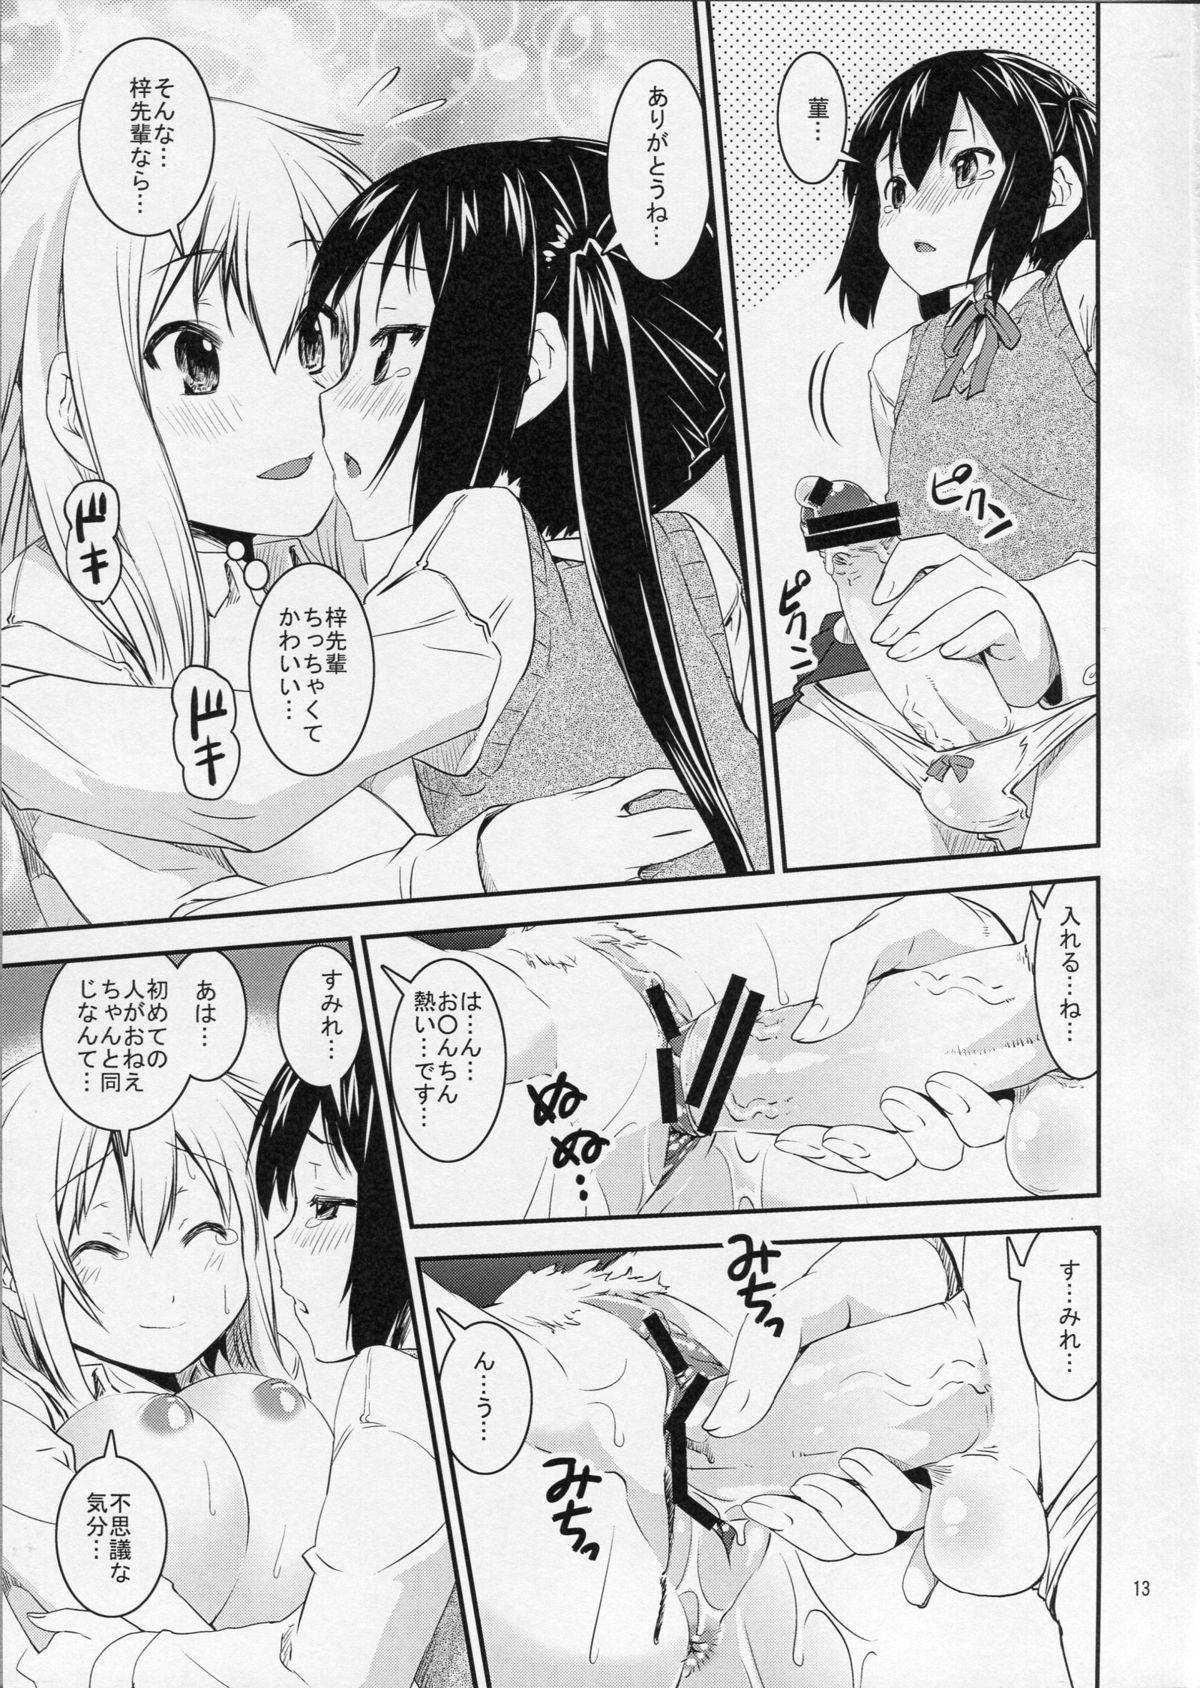 Casting Sumi Sumi Azu-nyan - K-on Reversecowgirl - Page 12